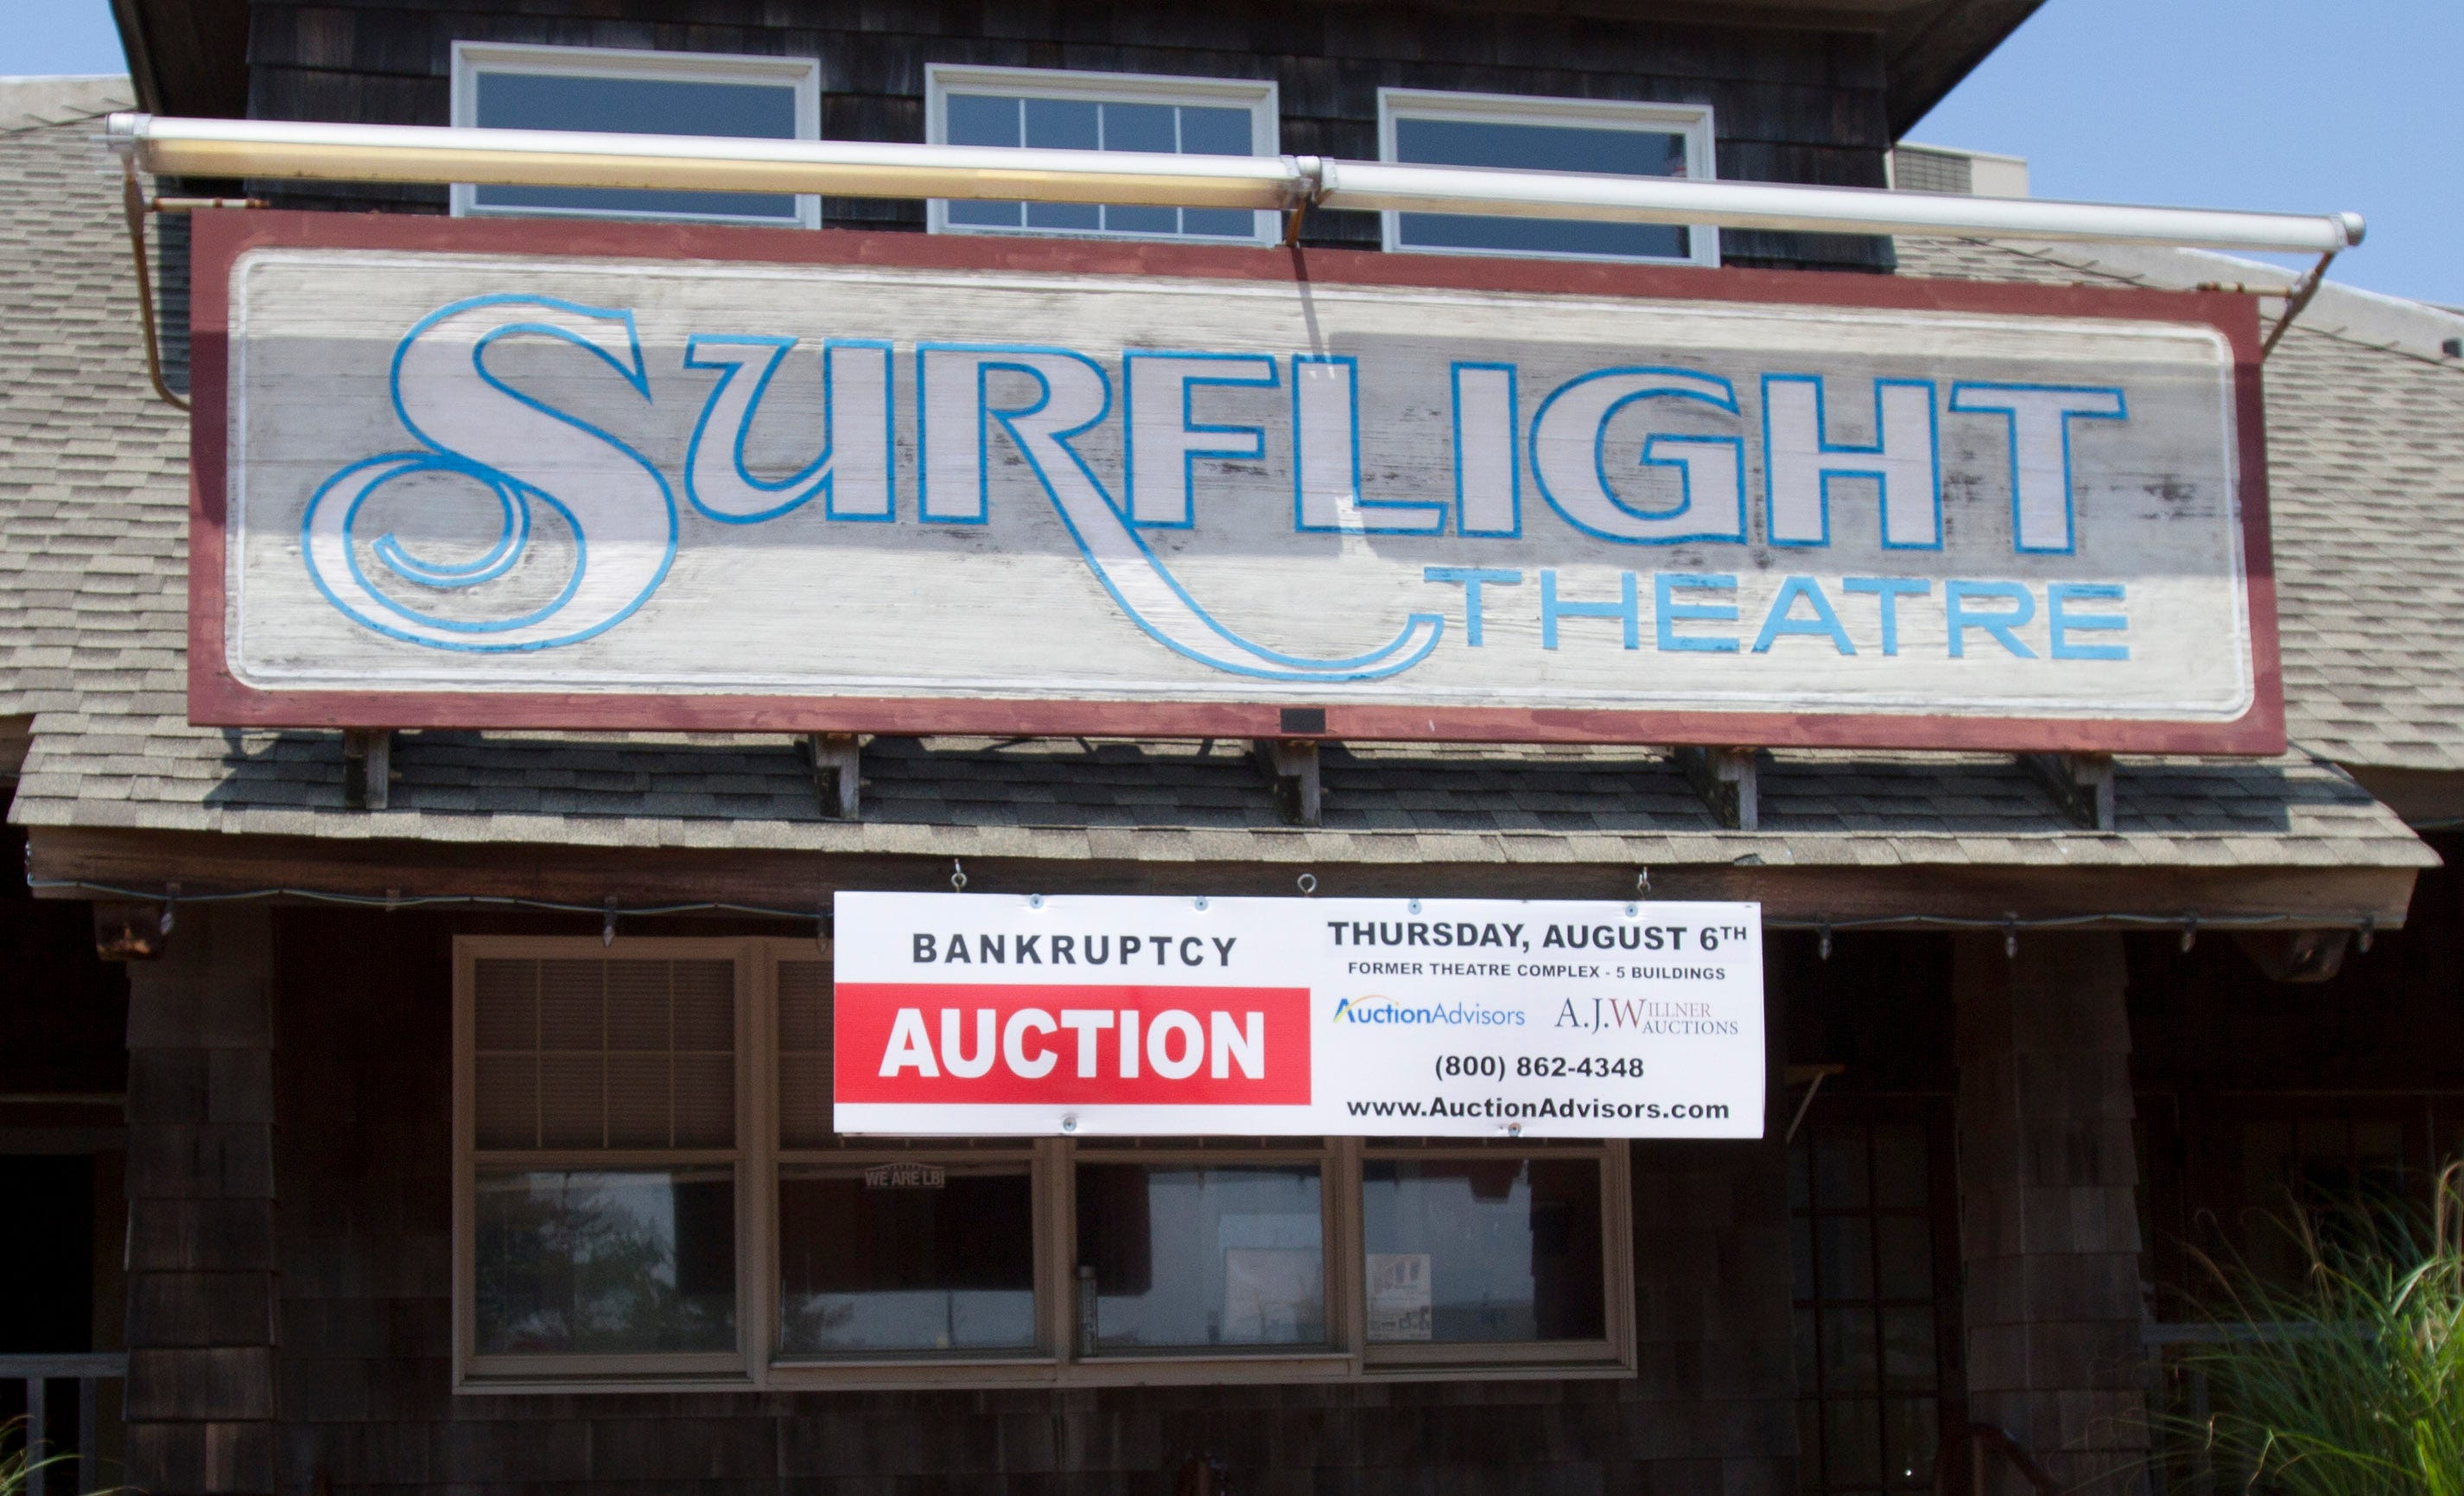 Surflight Theatre to reopen under new ownership?